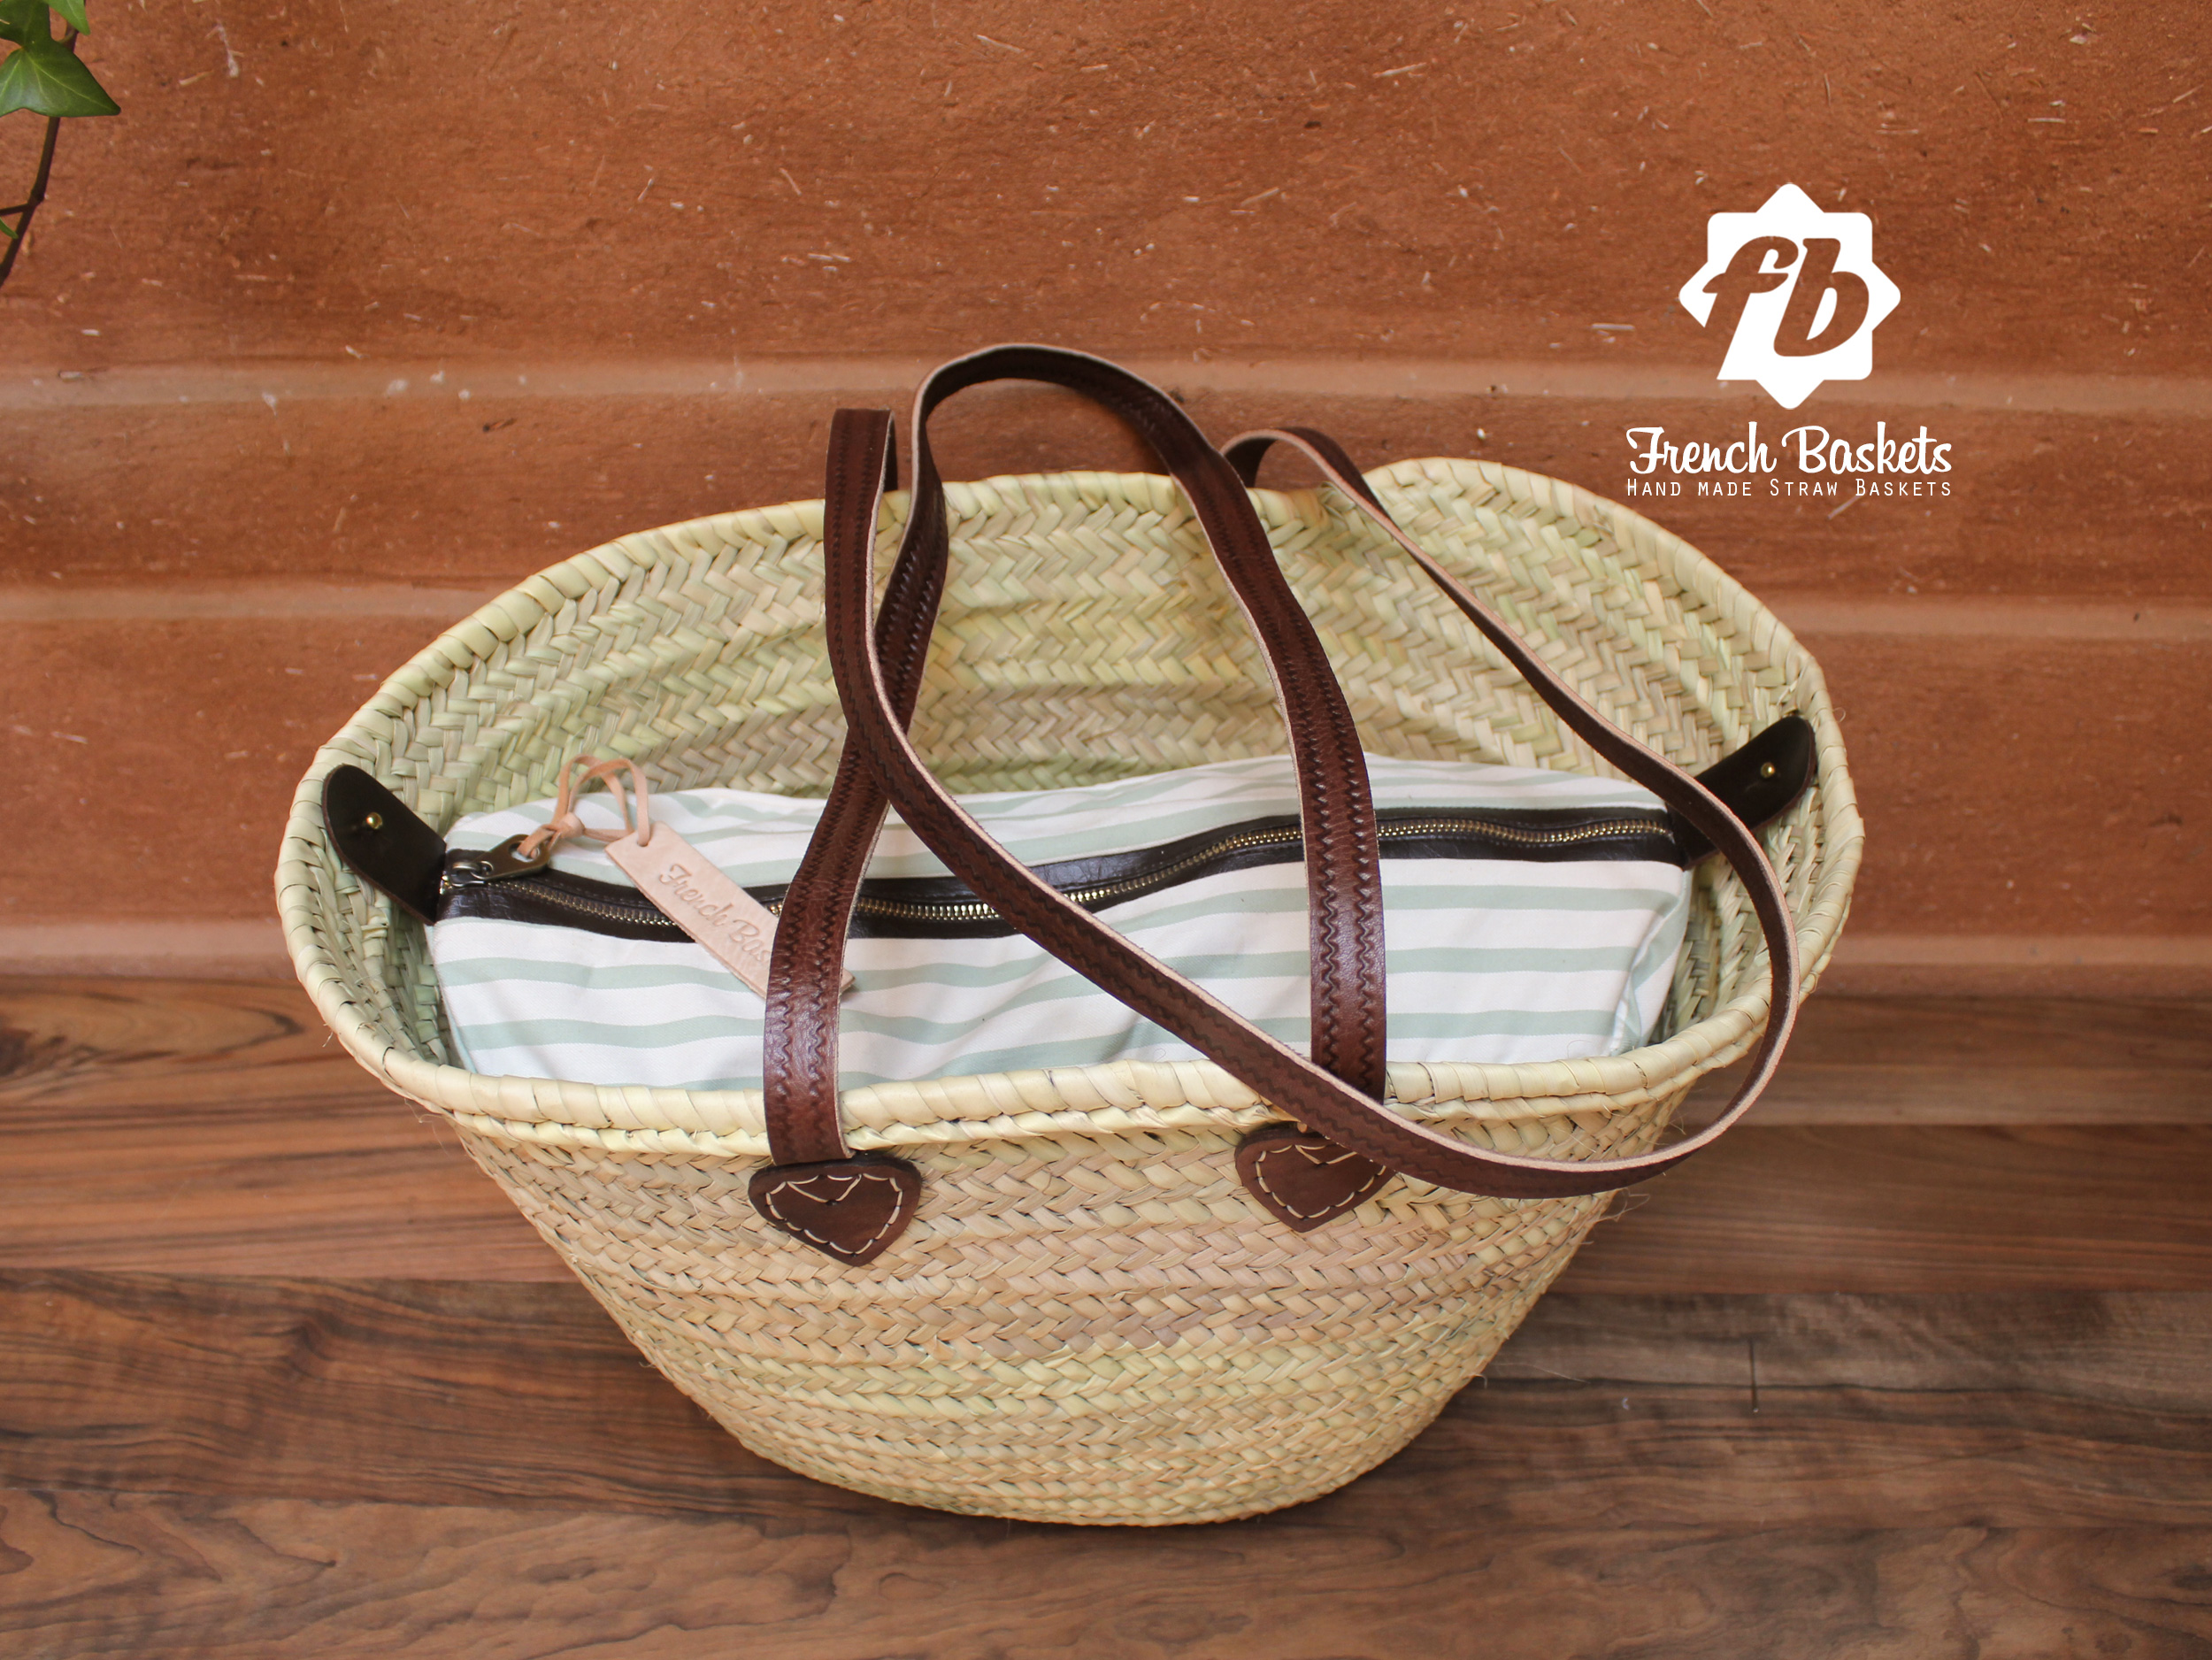 straw bag Handmade French Basket long Flat Leather Handle with Detachable Inside Pocket